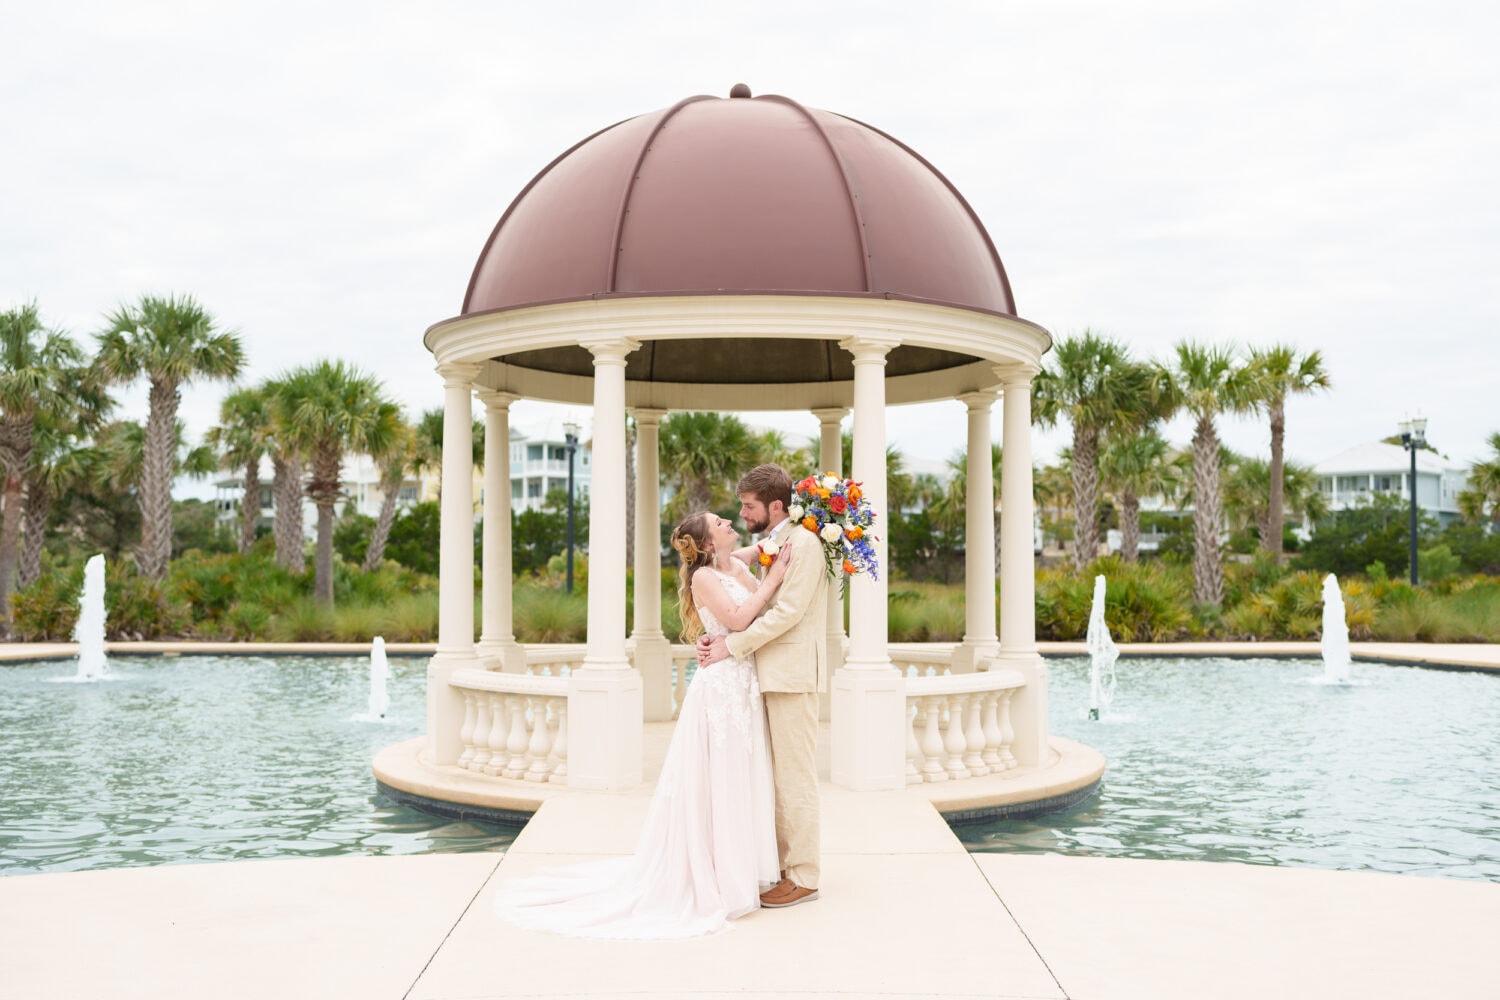 Bride and groom in front of the gazebo - 21 Main Events - North Myrtle Beach